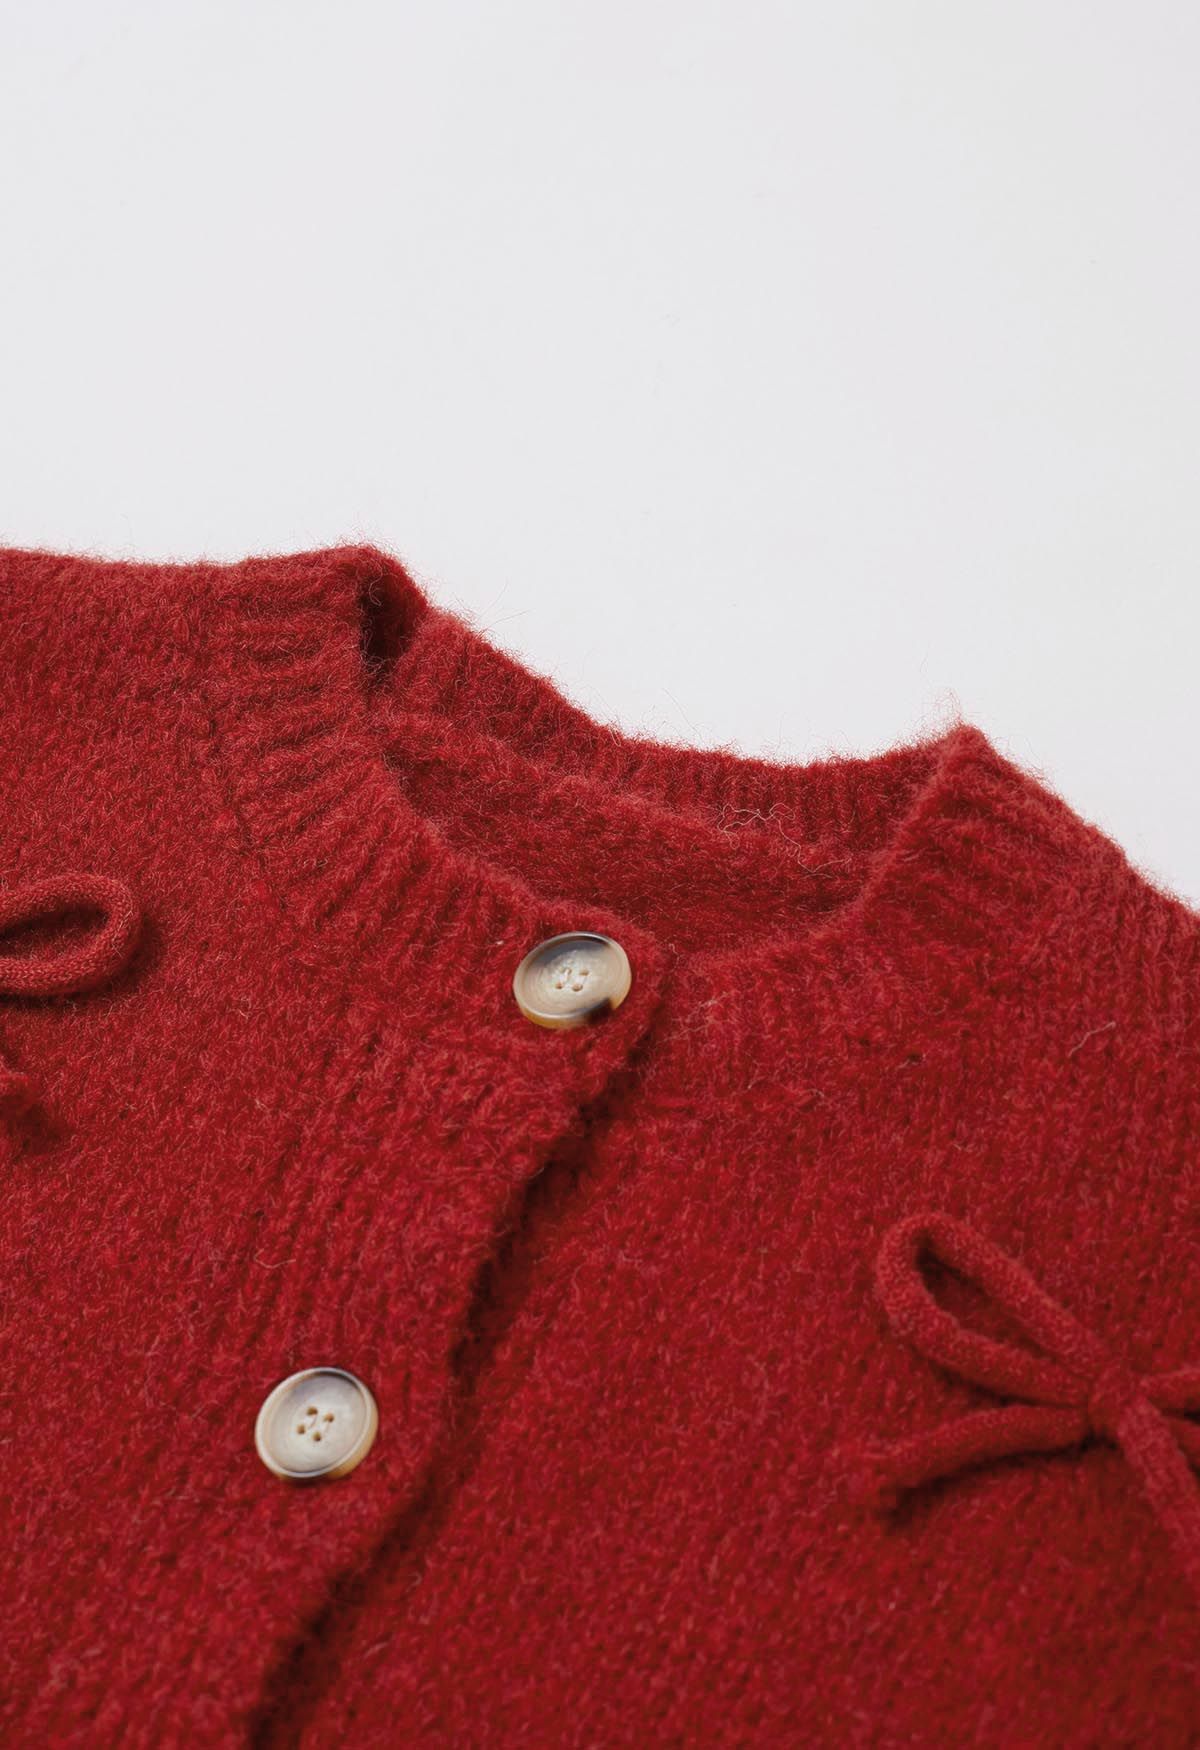 Adorable Bowknot Buttoned Knit Cardigan in Red